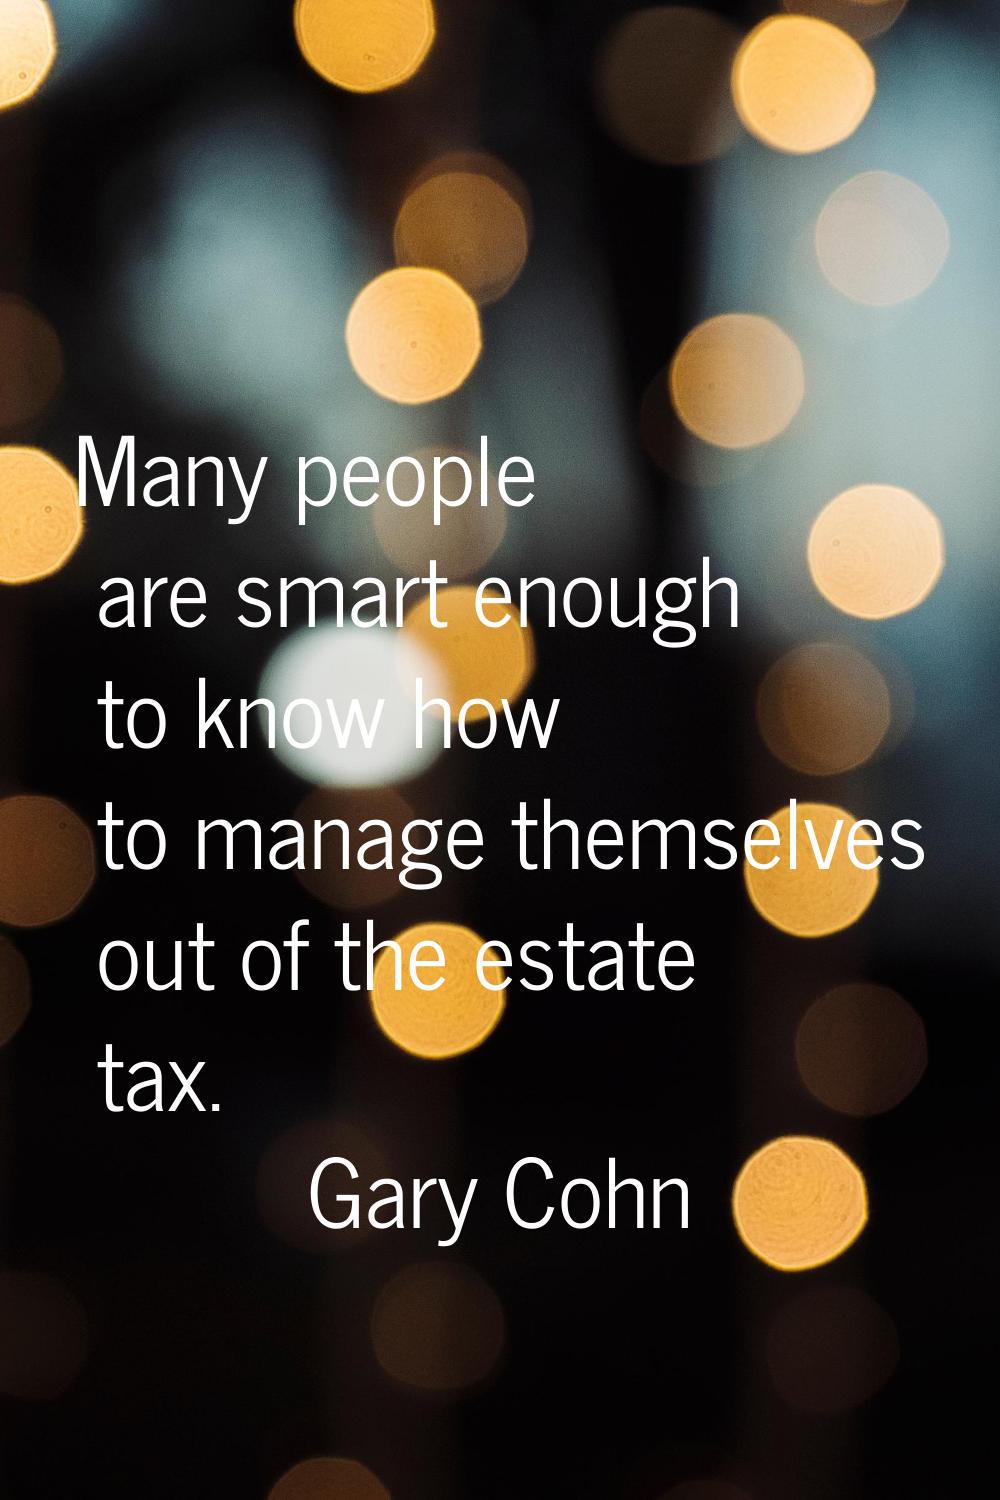 Many people are smart enough to know how to manage themselves out of the estate tax.